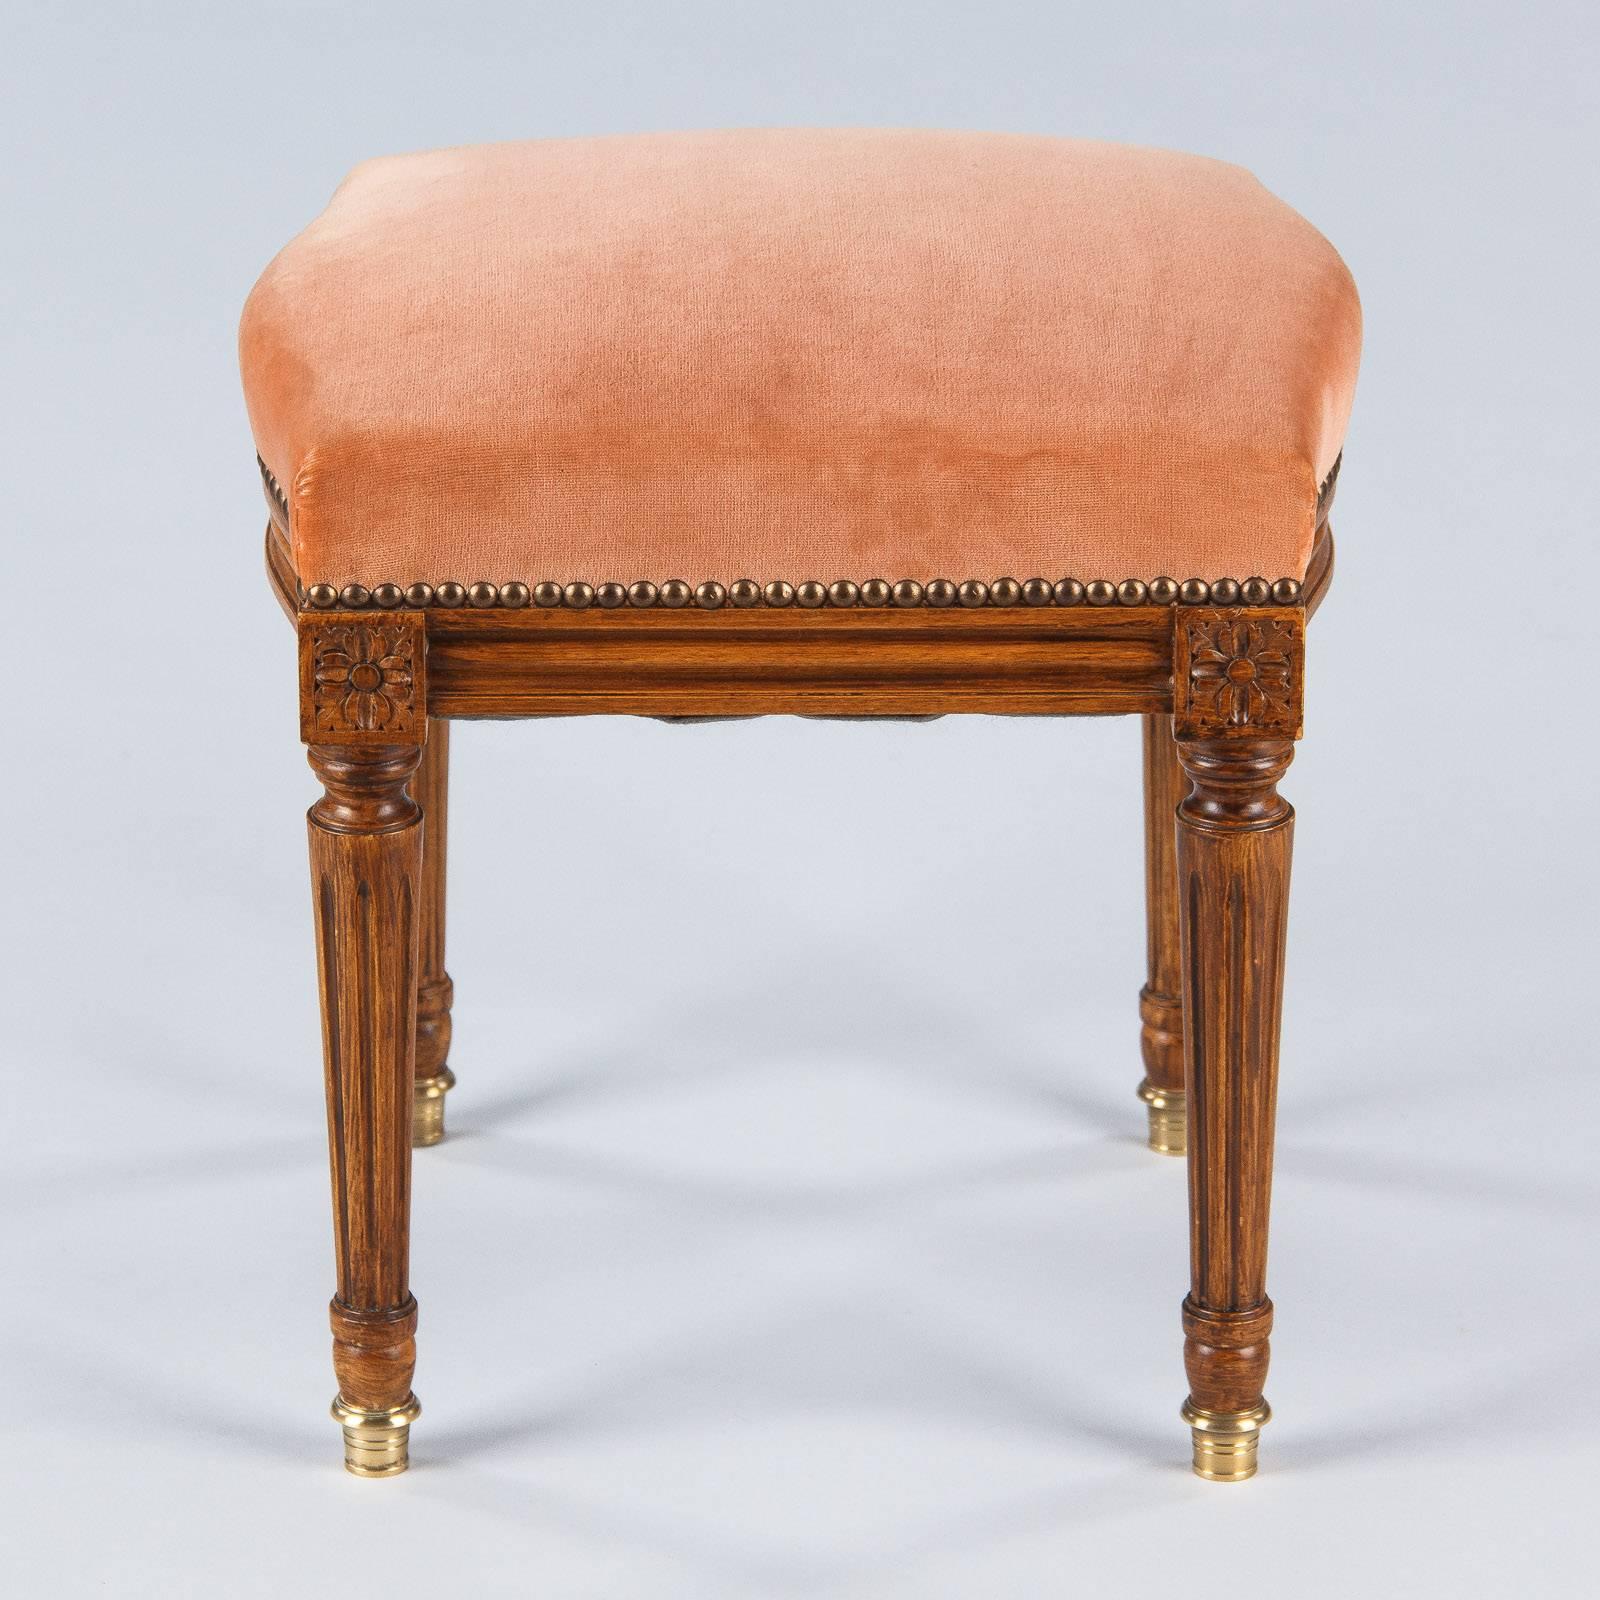 20th Century Louis XVI Style Stool from France, Early 1900s